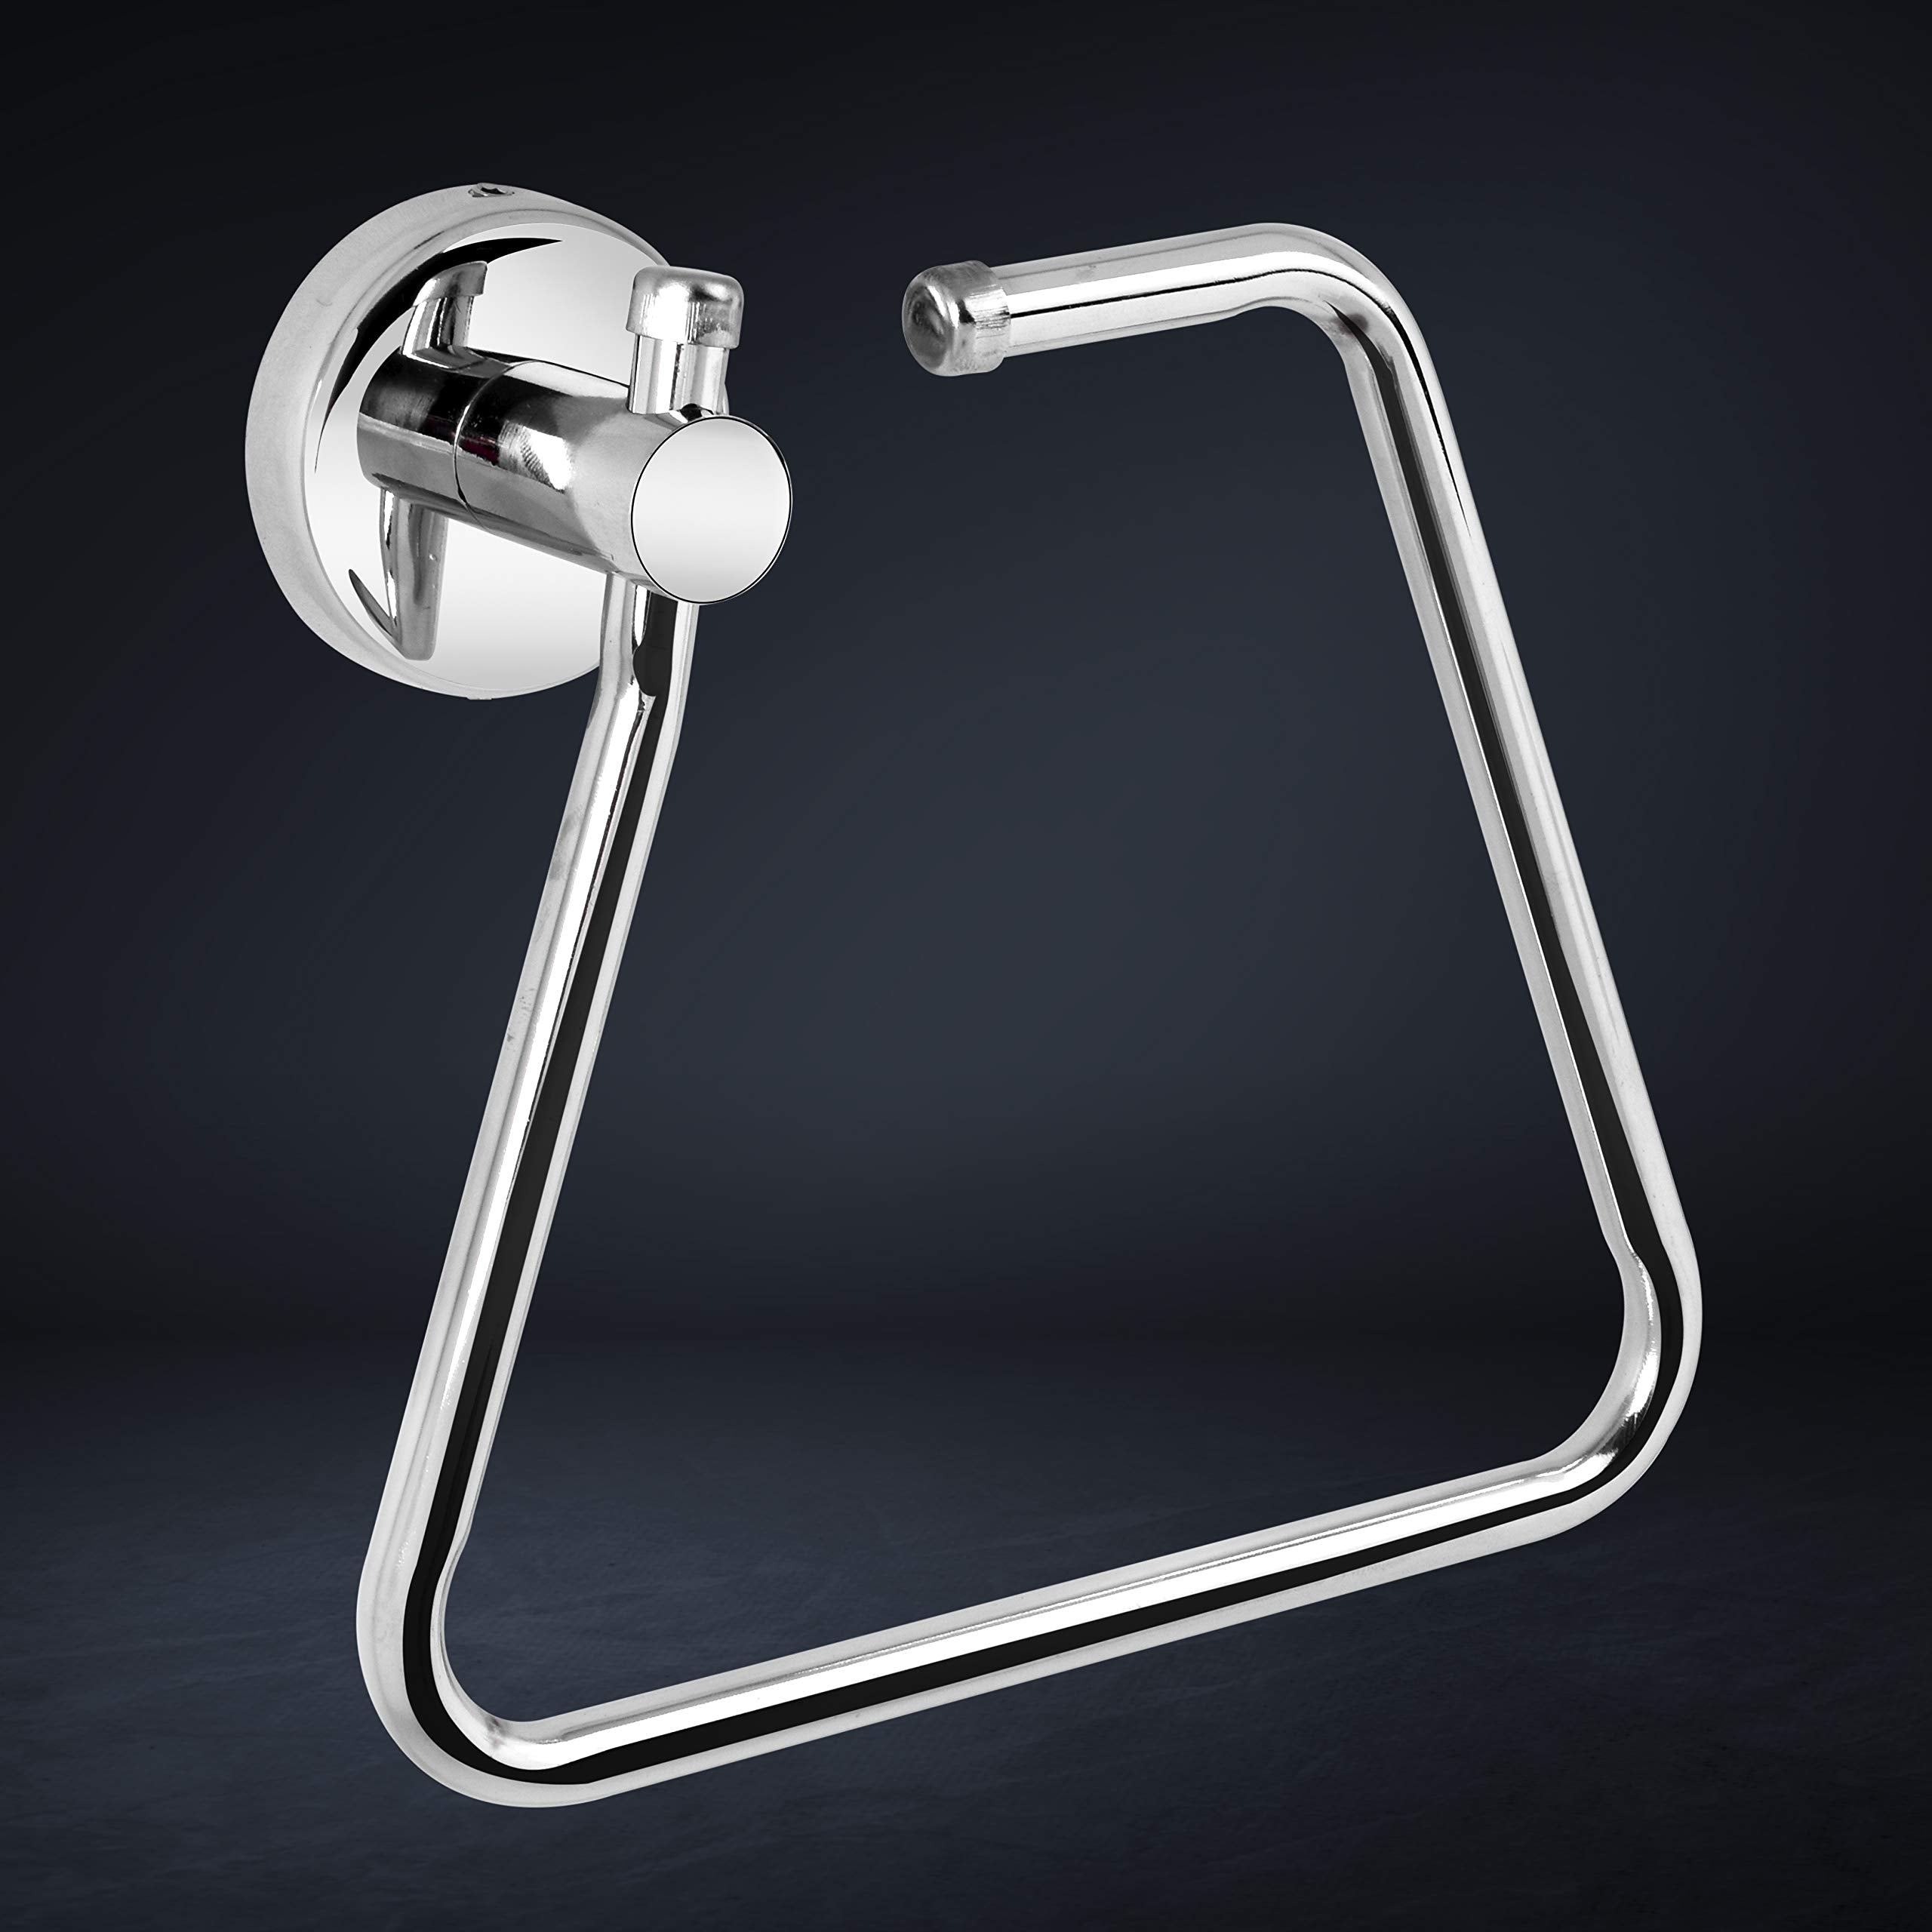 Plantex Stainless Steel Towel Ring for Bathroom/Napkin-Towel Hanger/Wash Basin/Bathroom Accessories - (Chrome-Rectangle) - Pack of 4